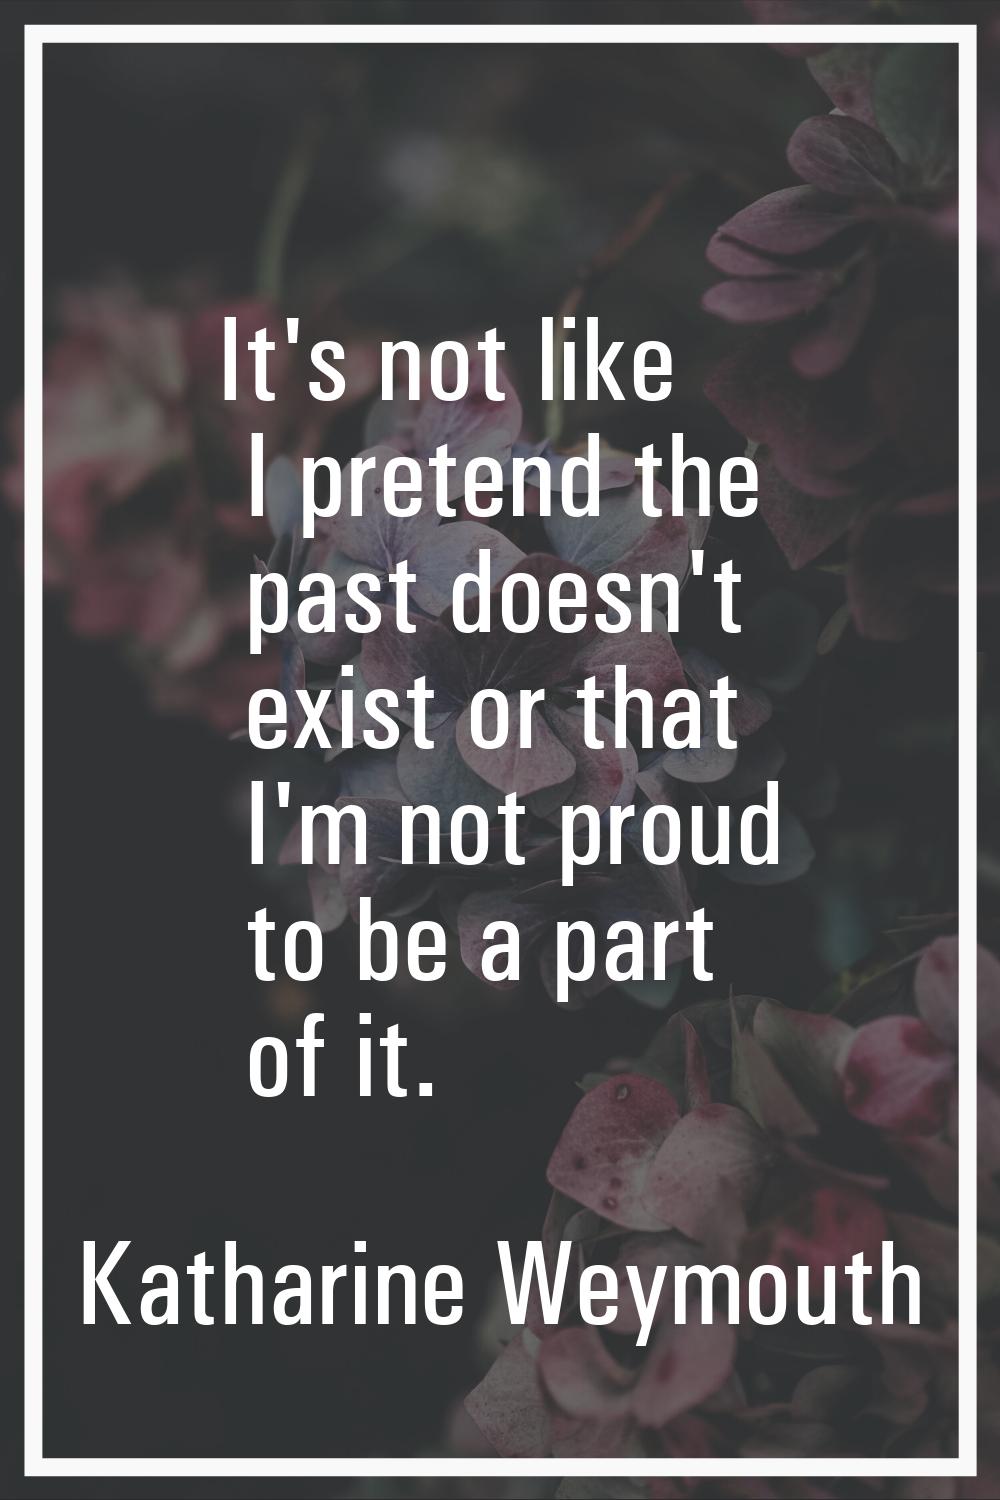 It's not like I pretend the past doesn't exist or that I'm not proud to be a part of it.